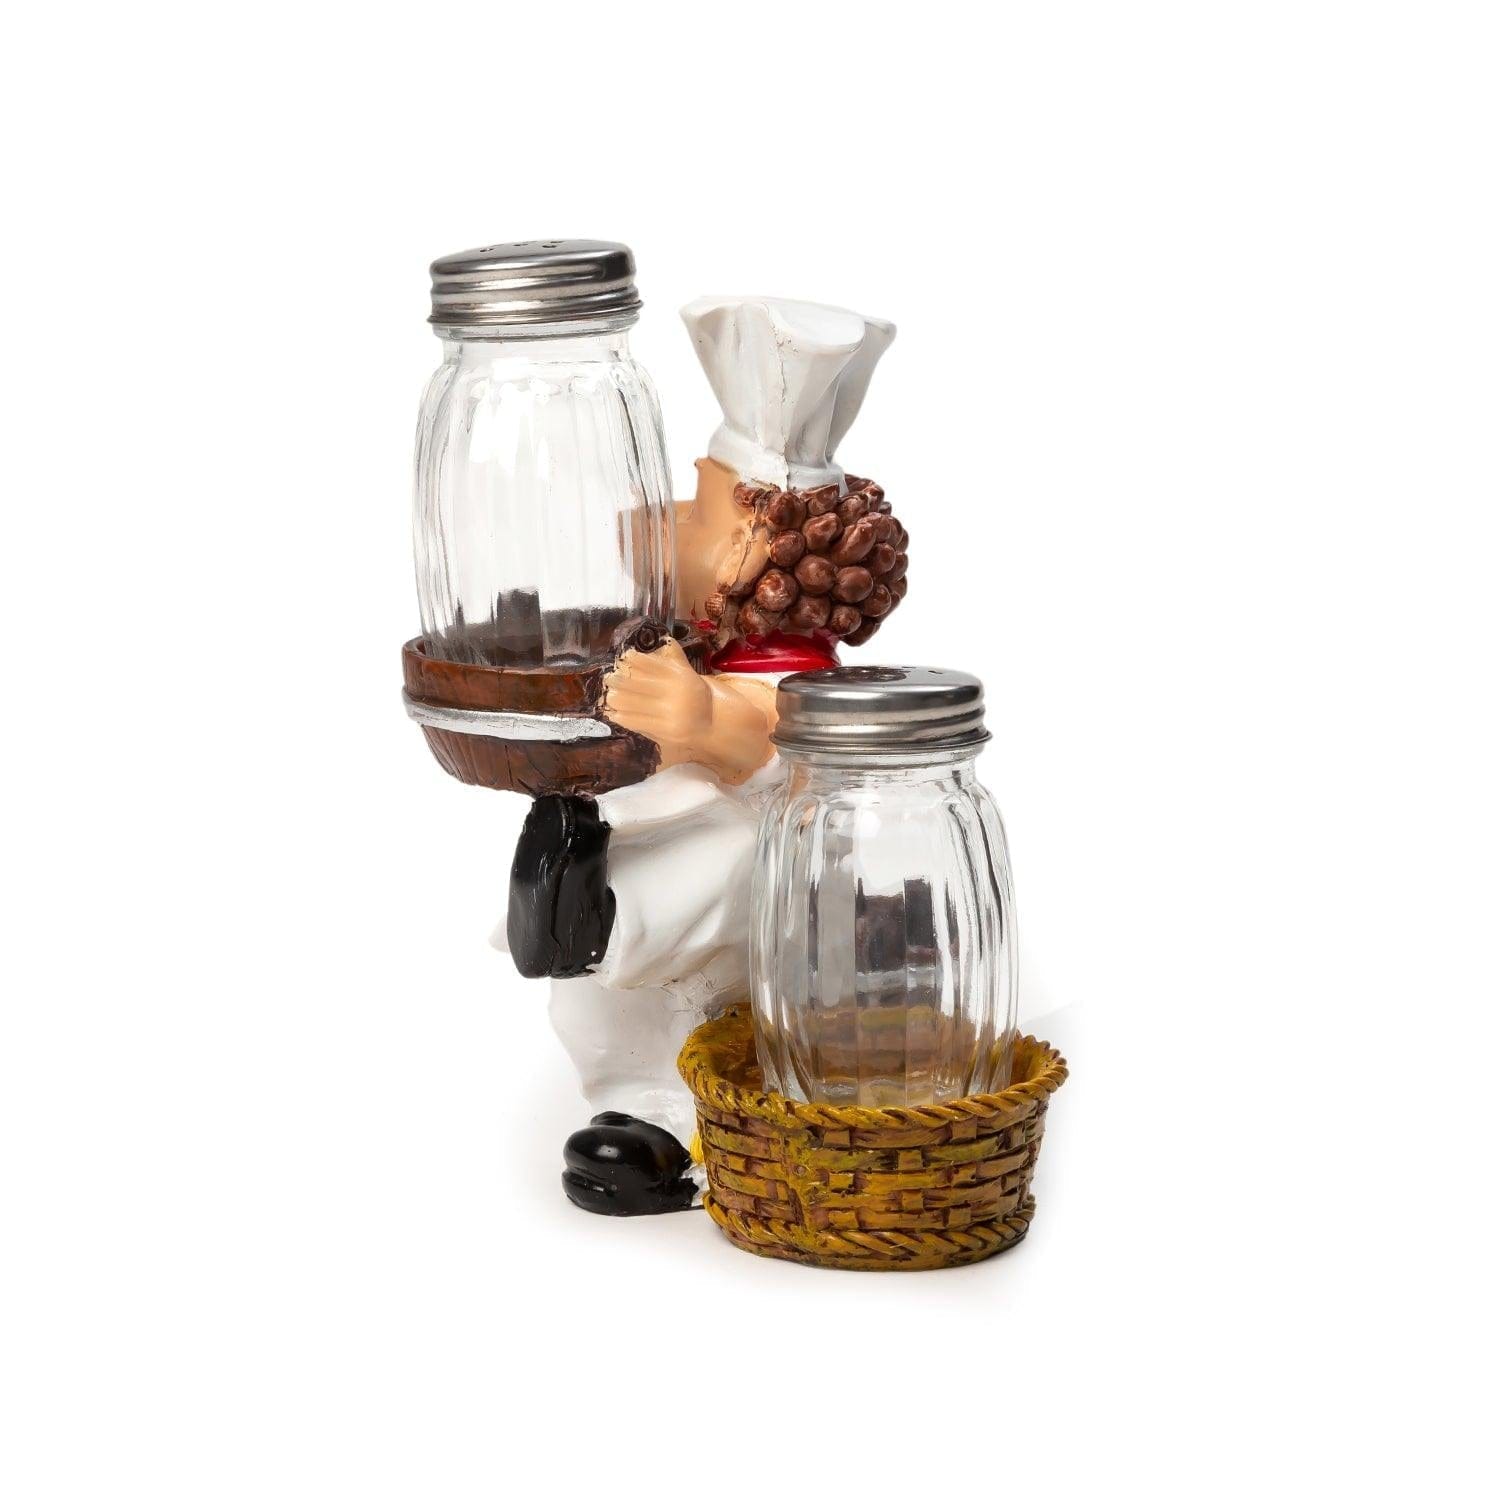 Foodie Chef Figurine Resin Salt & Pepper Shakers with Toothpick Holder Set (Brown Baskets)